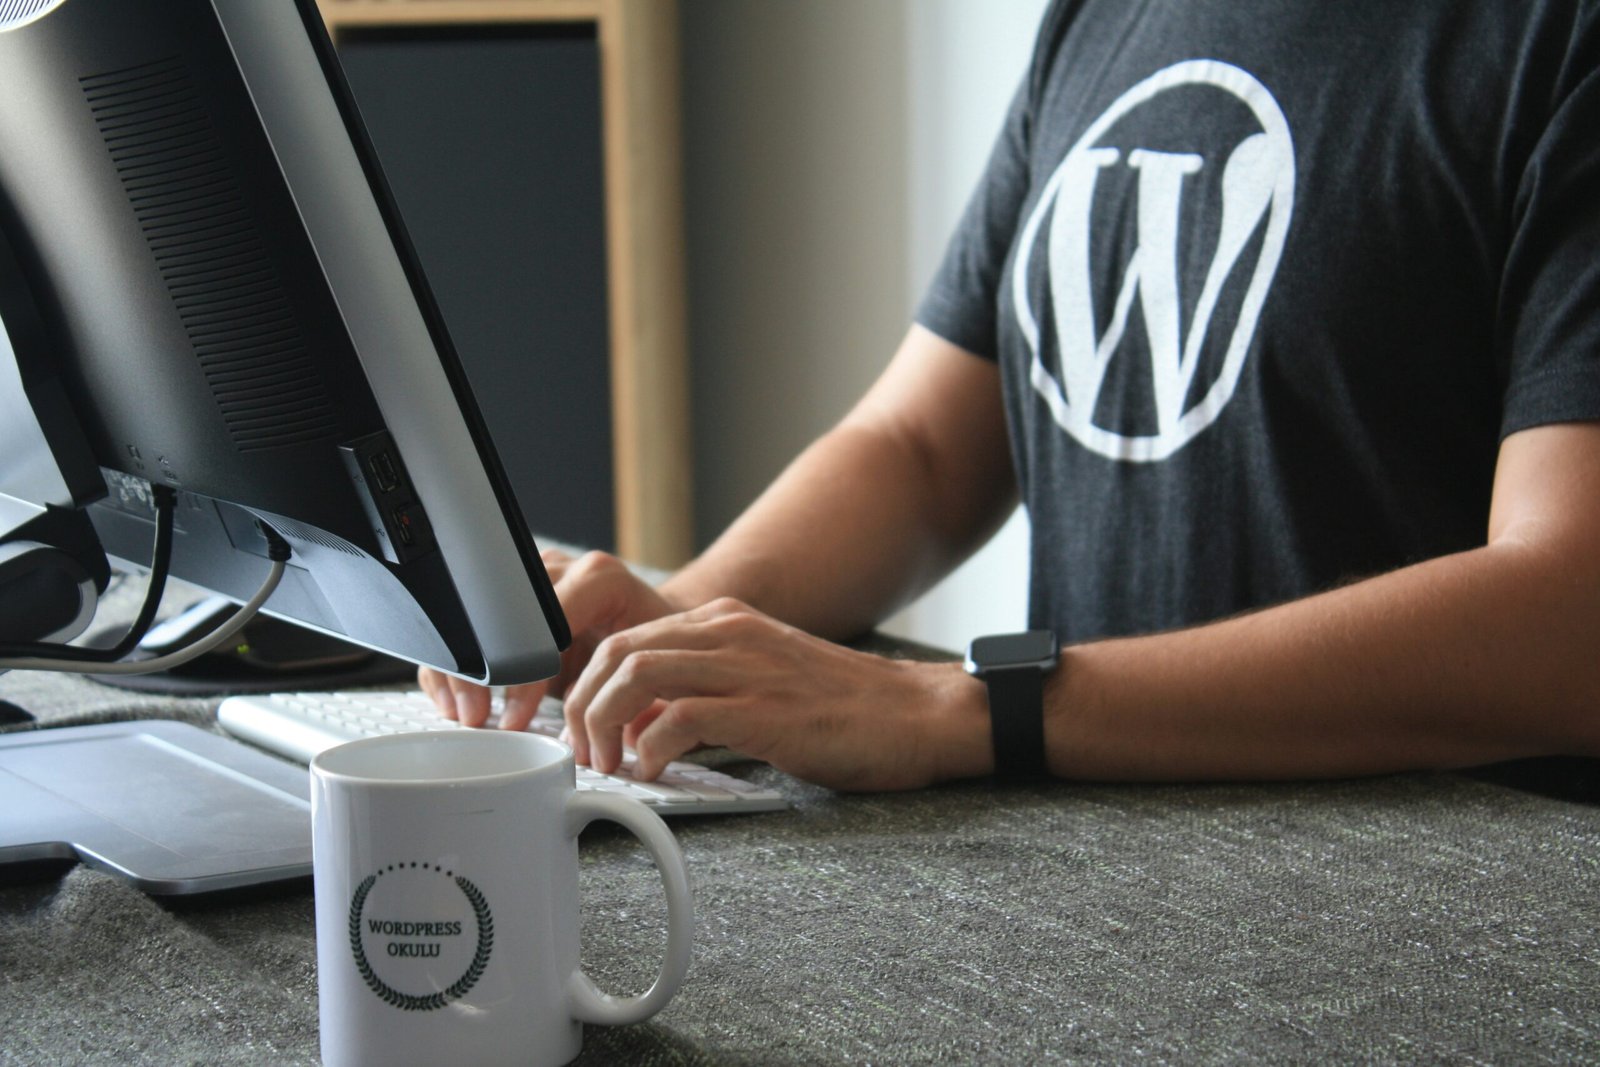 All You Need to Know About Featured Images in WordPress